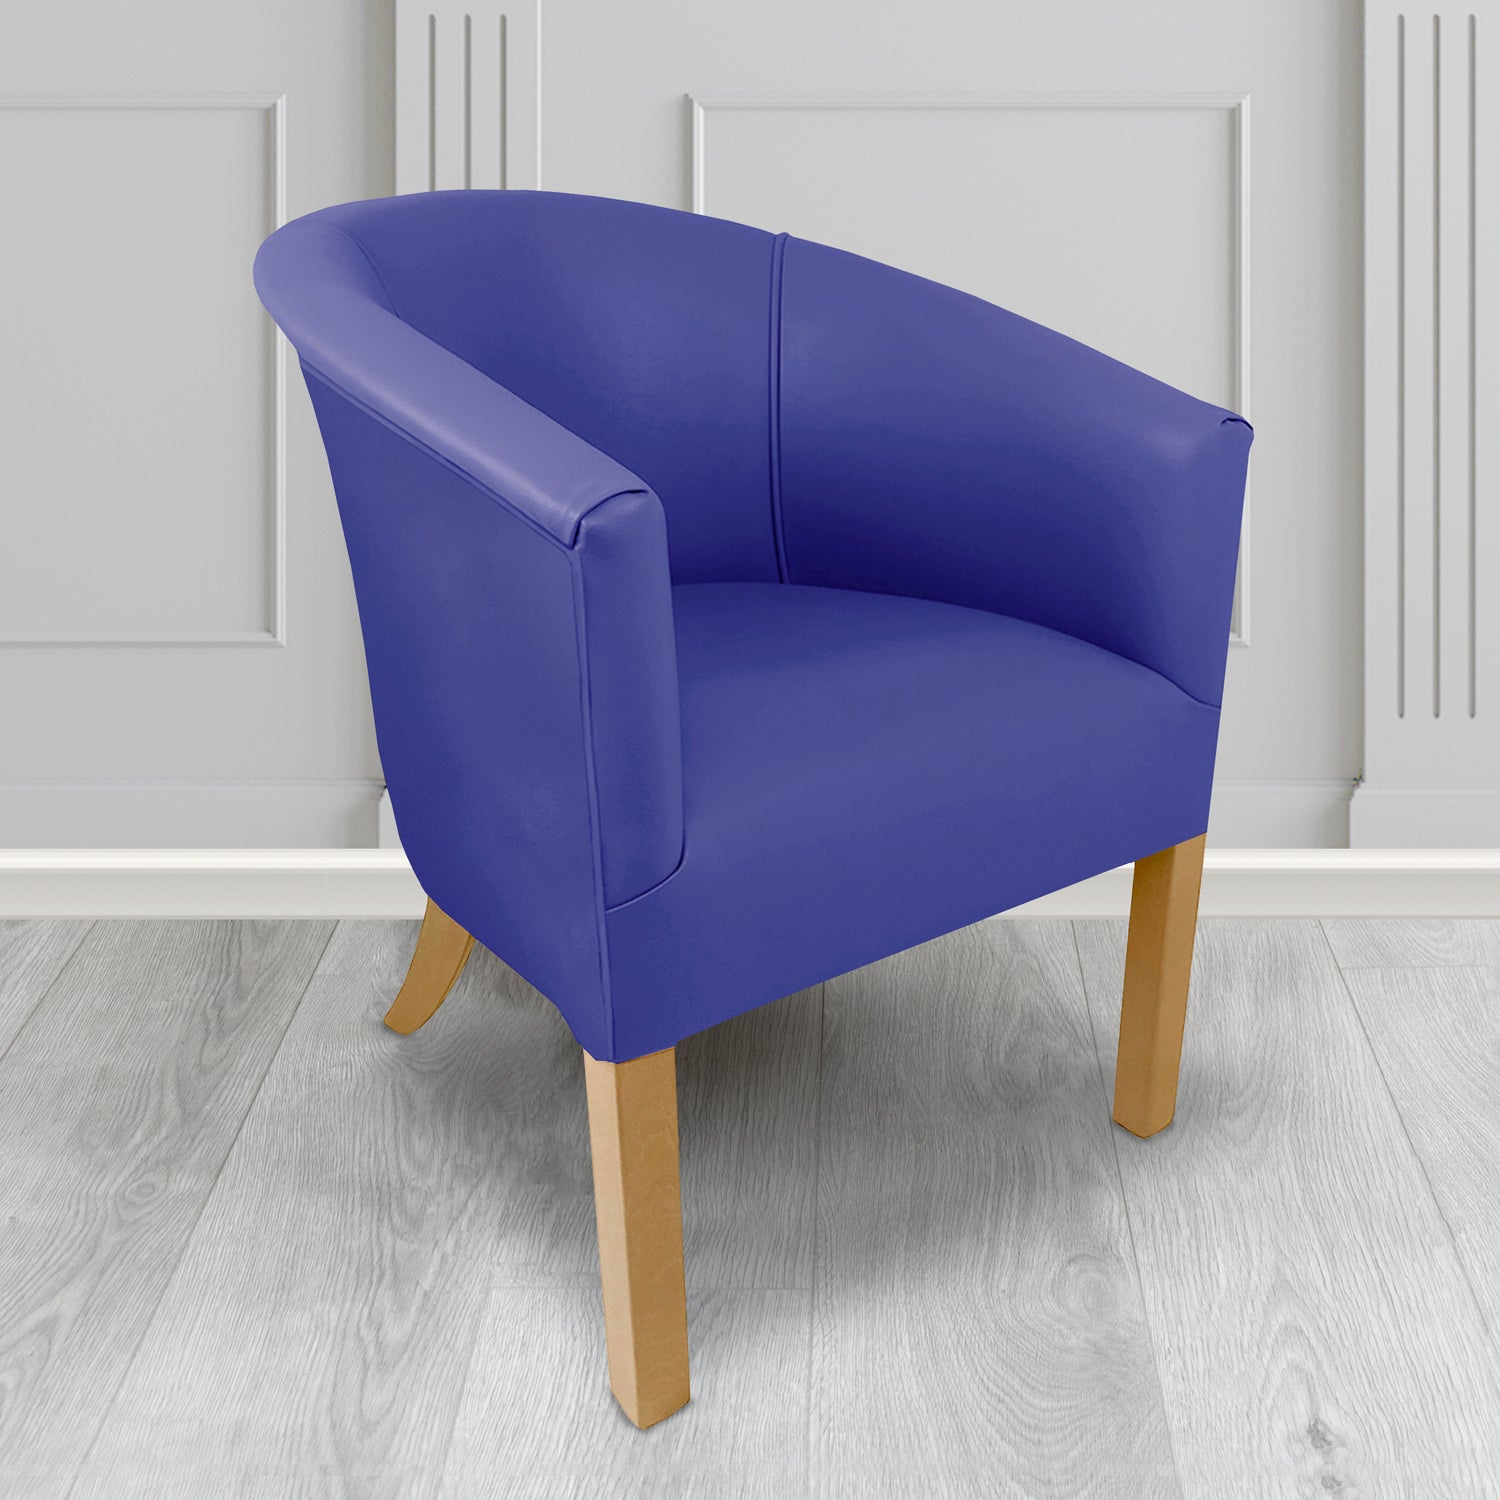 Lewisham Tub Chair in Agua Paint Pot Royal Crib 5 Faux Leather - Antimicrobial, Stain Resistant & Waterproof - The Tub Chair Shop